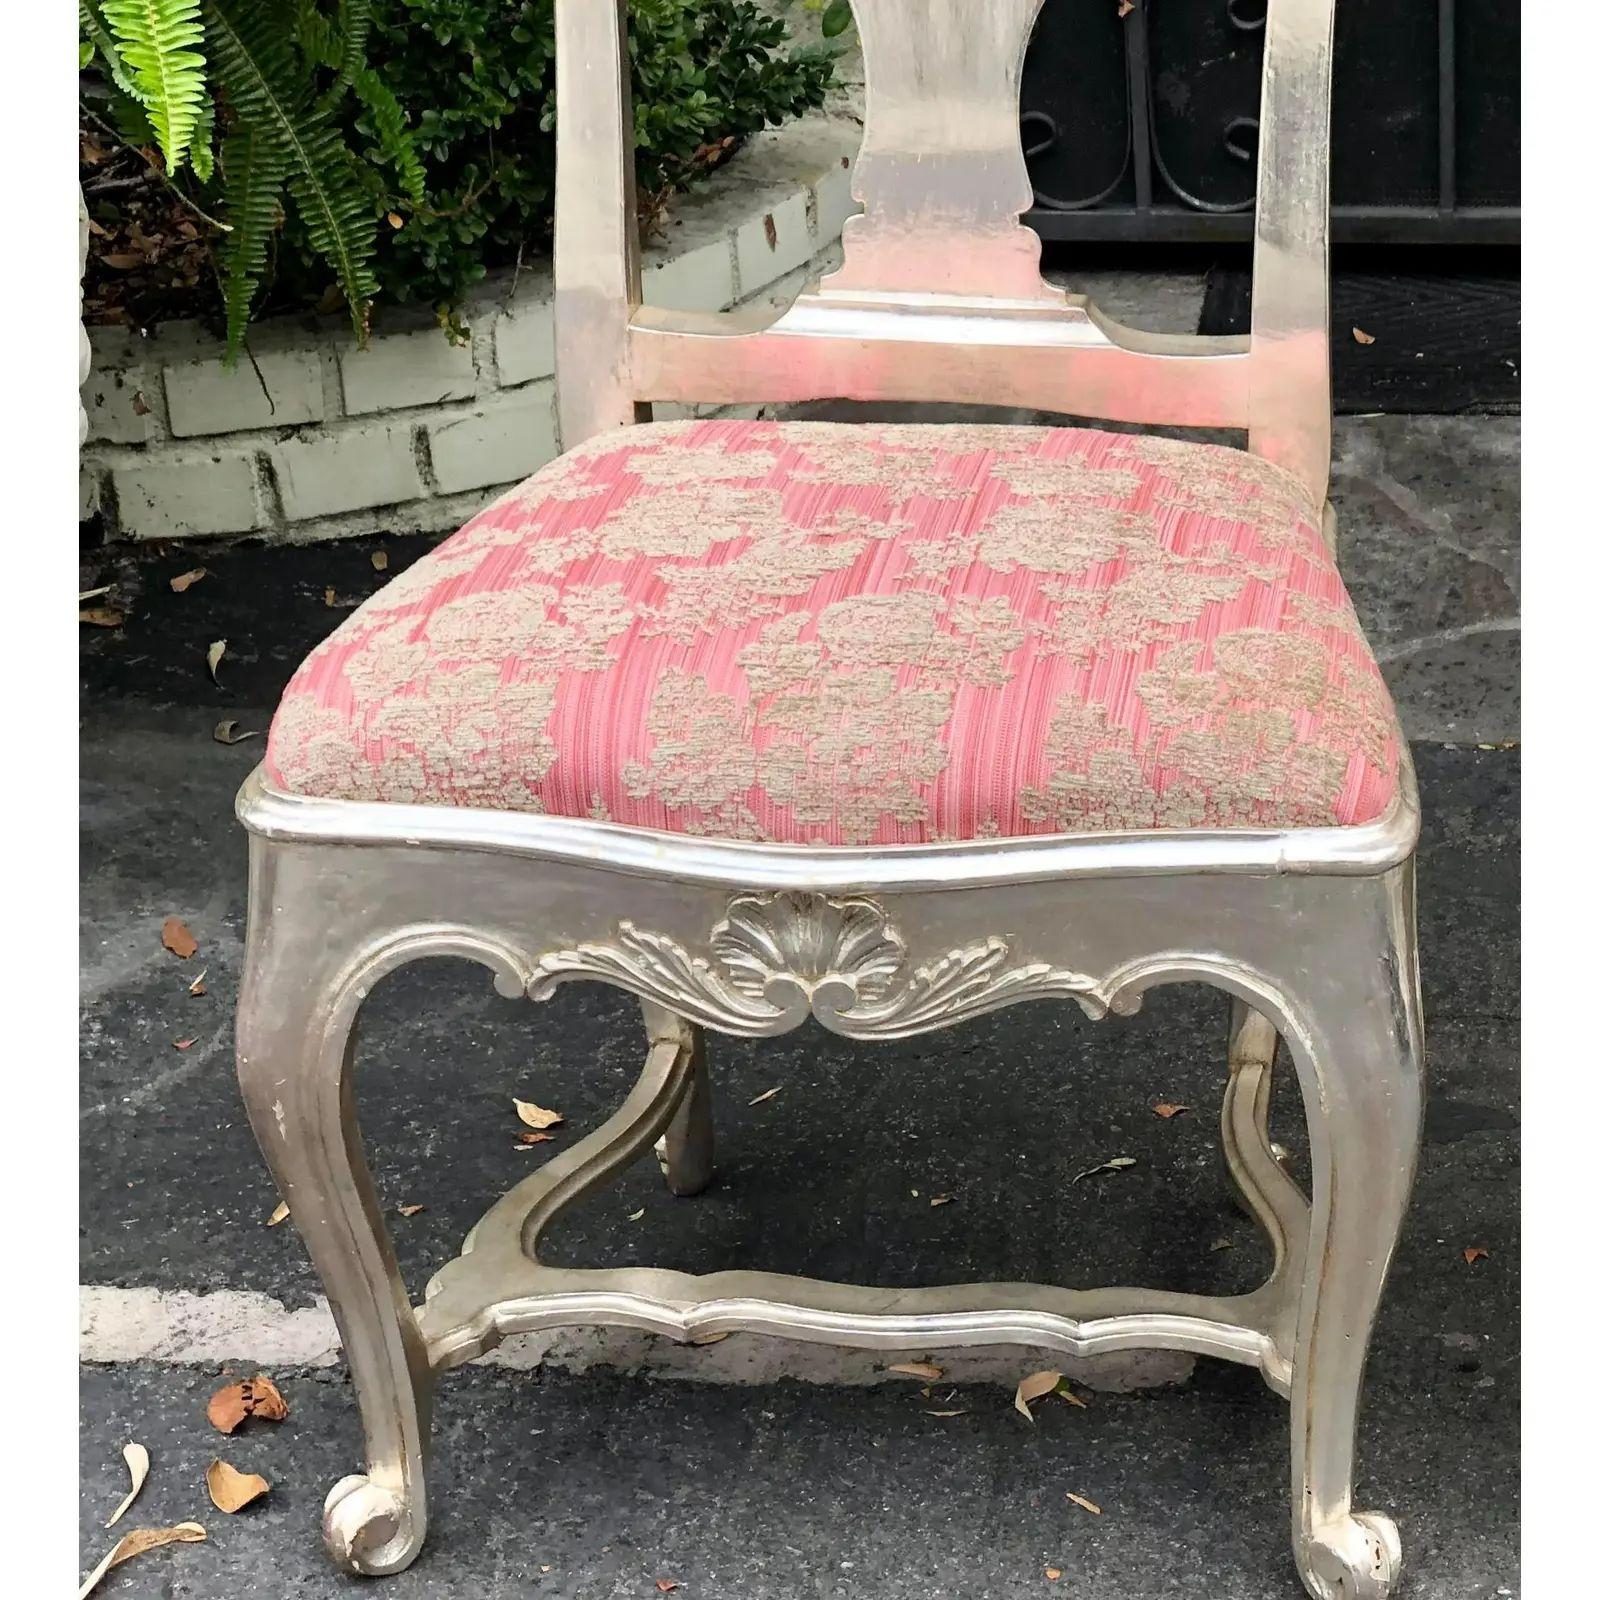 Antique George III silverleaf giltwood & pink chenille side chair.

Additional information: 
Materials: Giltwood, Rayon Chenille
Color: Pink
Period: 18th century.
Styles: Georgian.
Number of Seats: 1.
Item Type: Vintage, Antique or